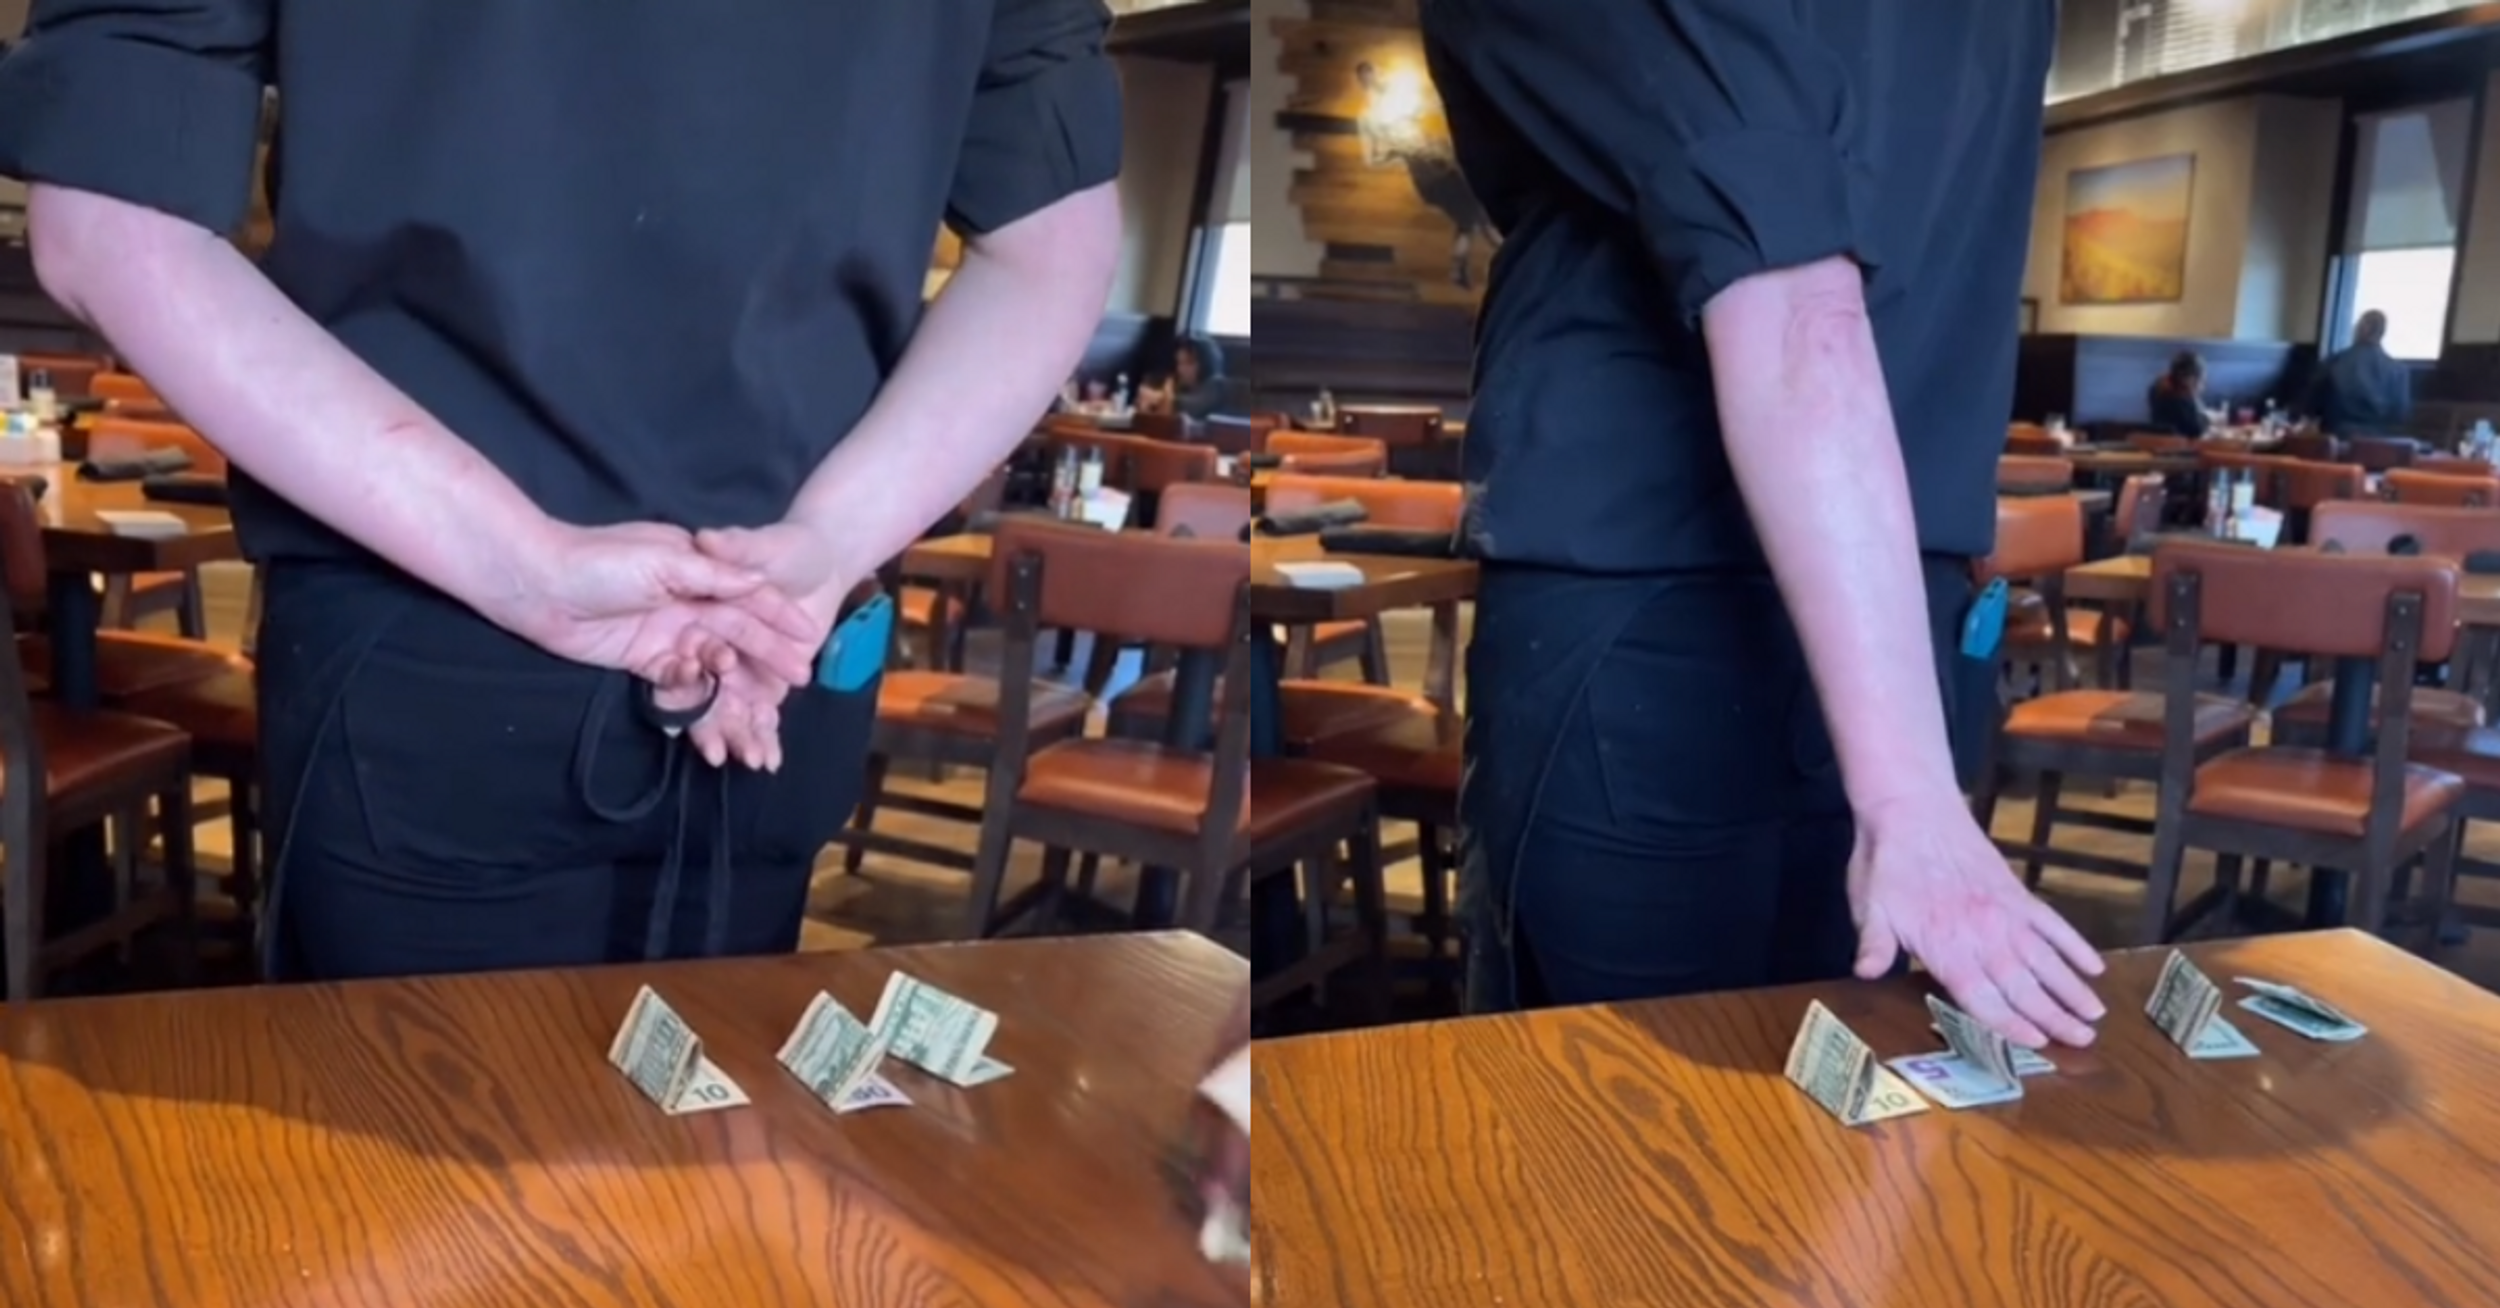 TikTokers Spark Debate By Making Server Play Game Of Chance To Determine How Much Their Tip Is